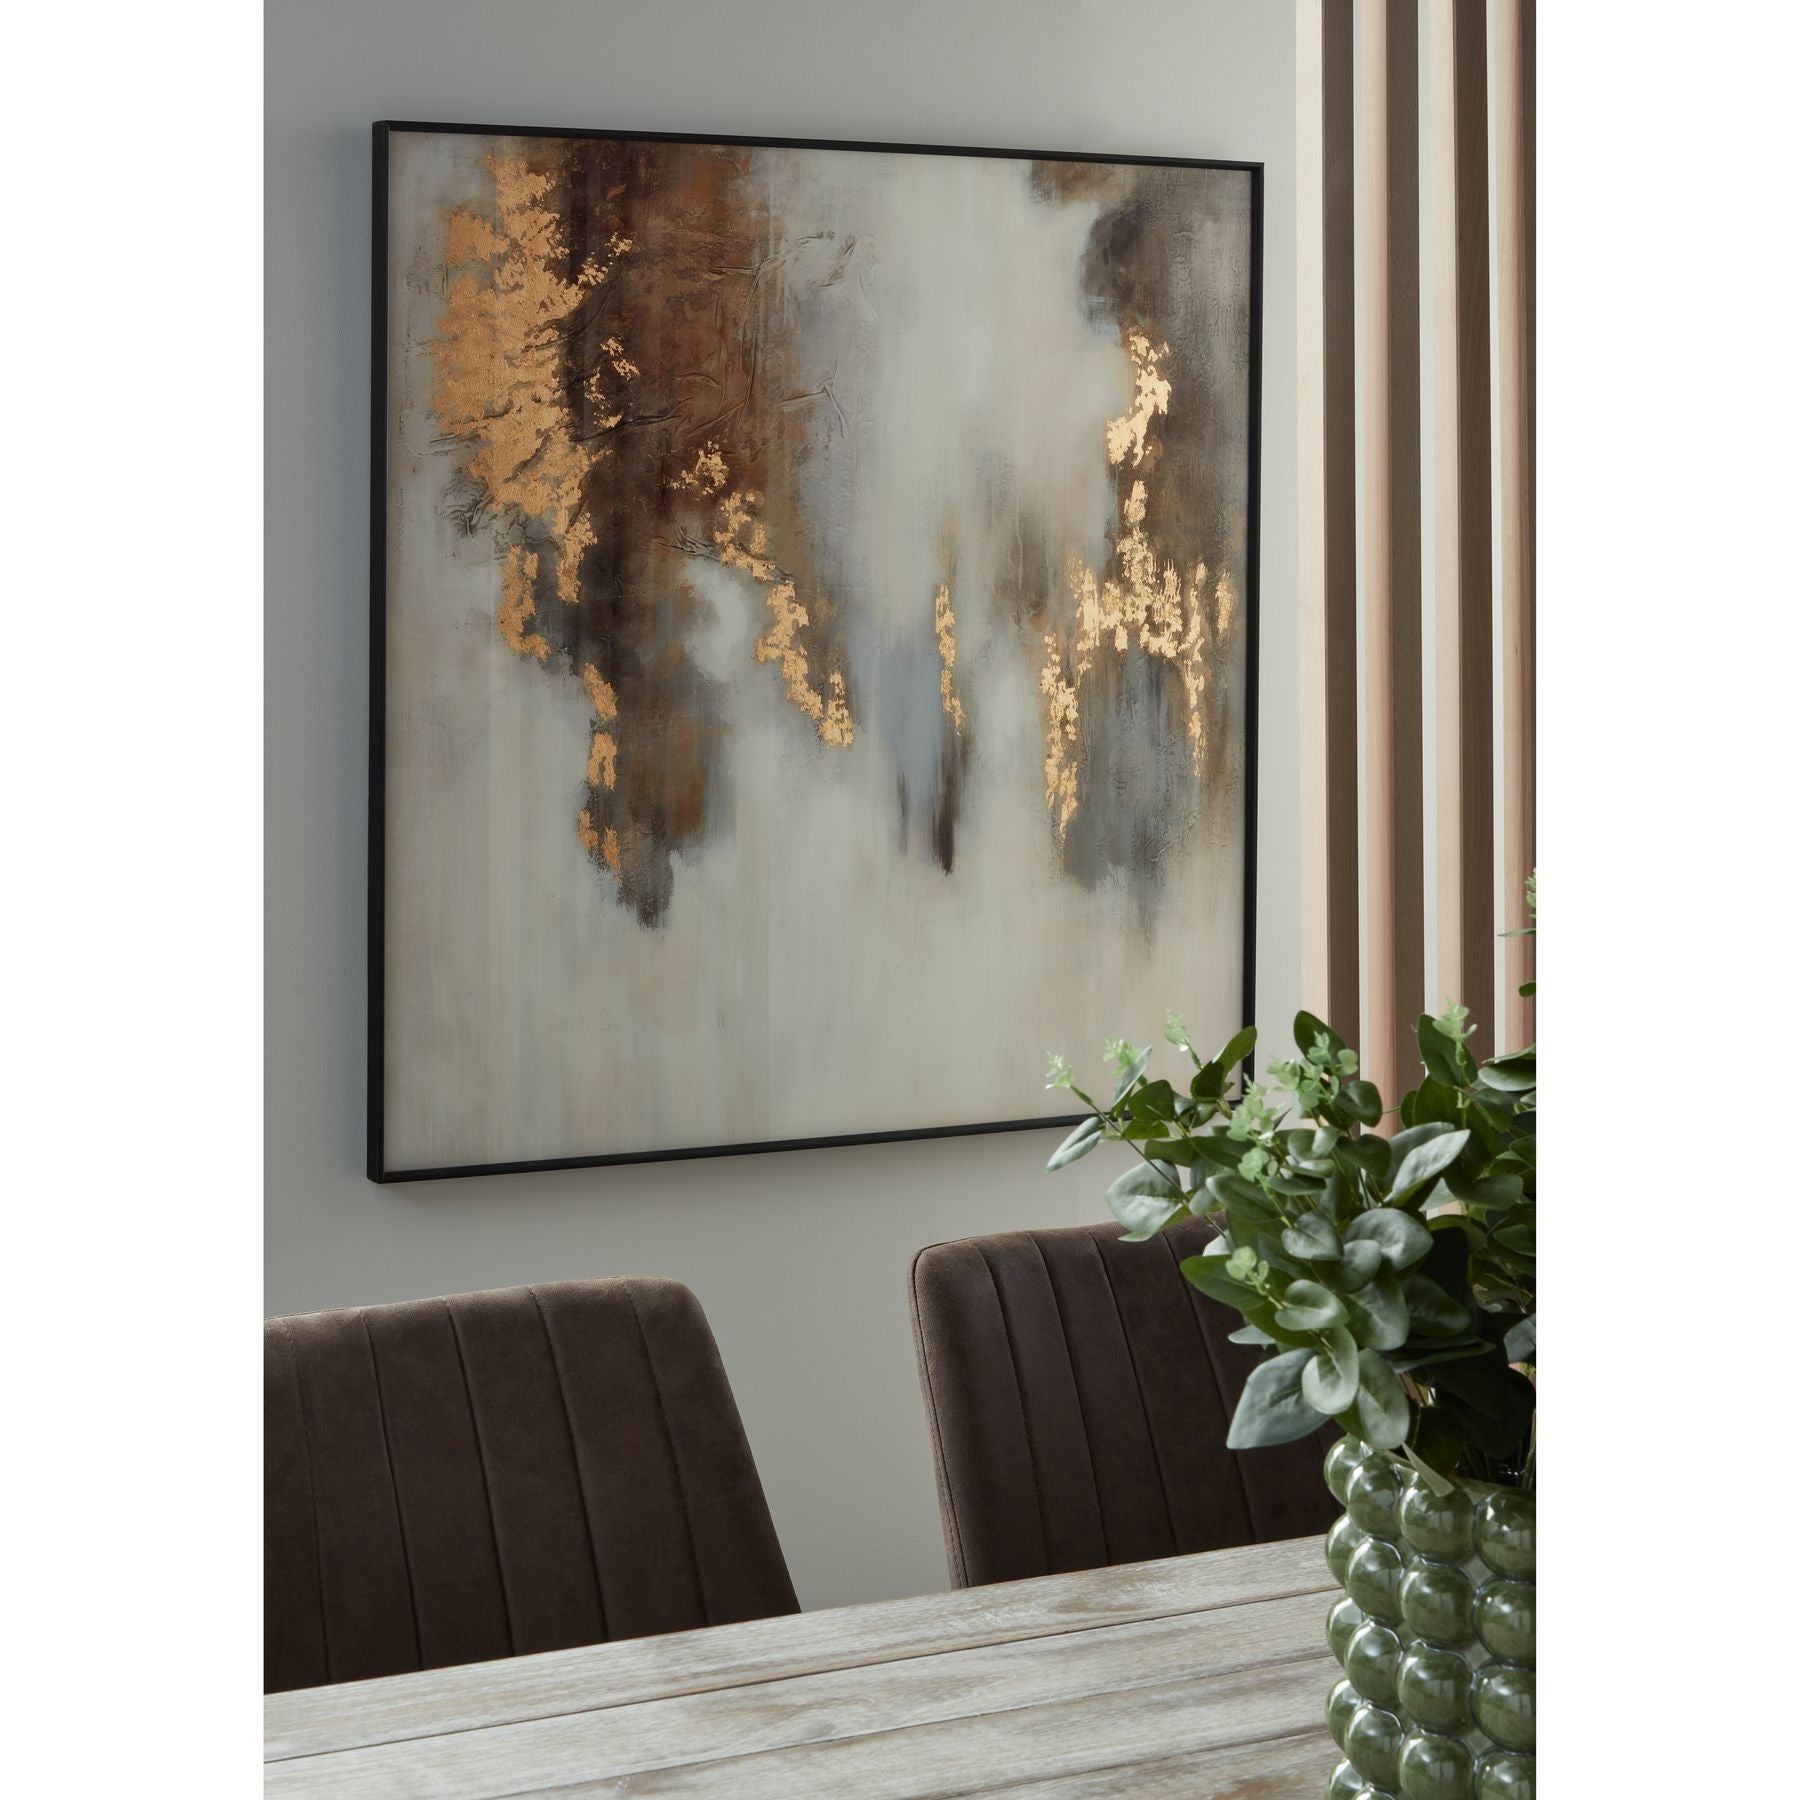 Metallic Soft Abstract Glass Image In Gold Frame